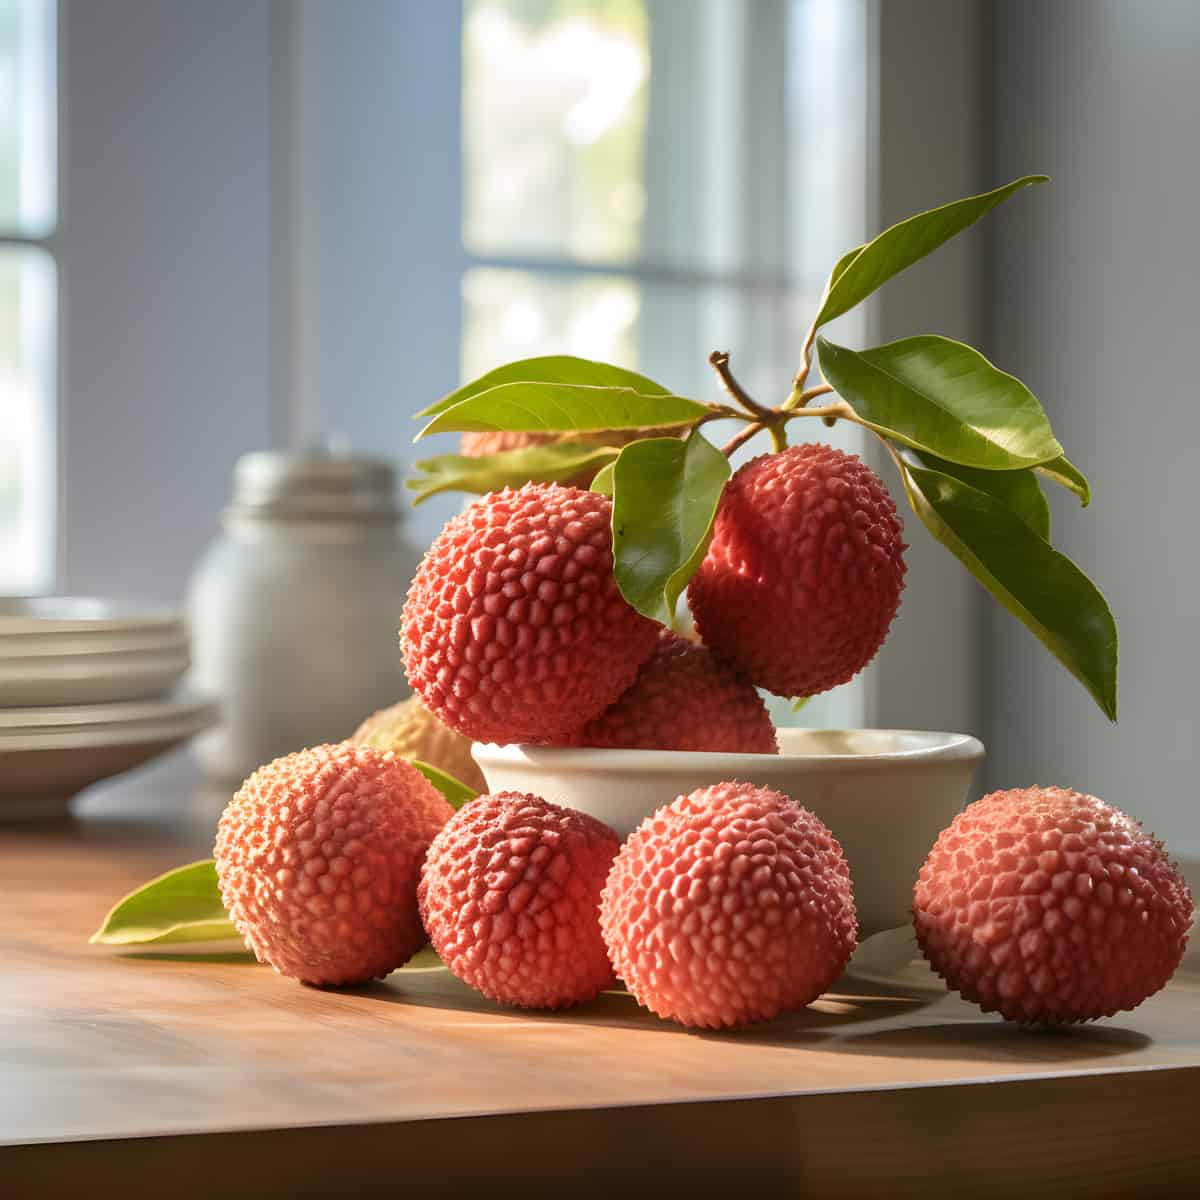 Lychee on a kitchen counter